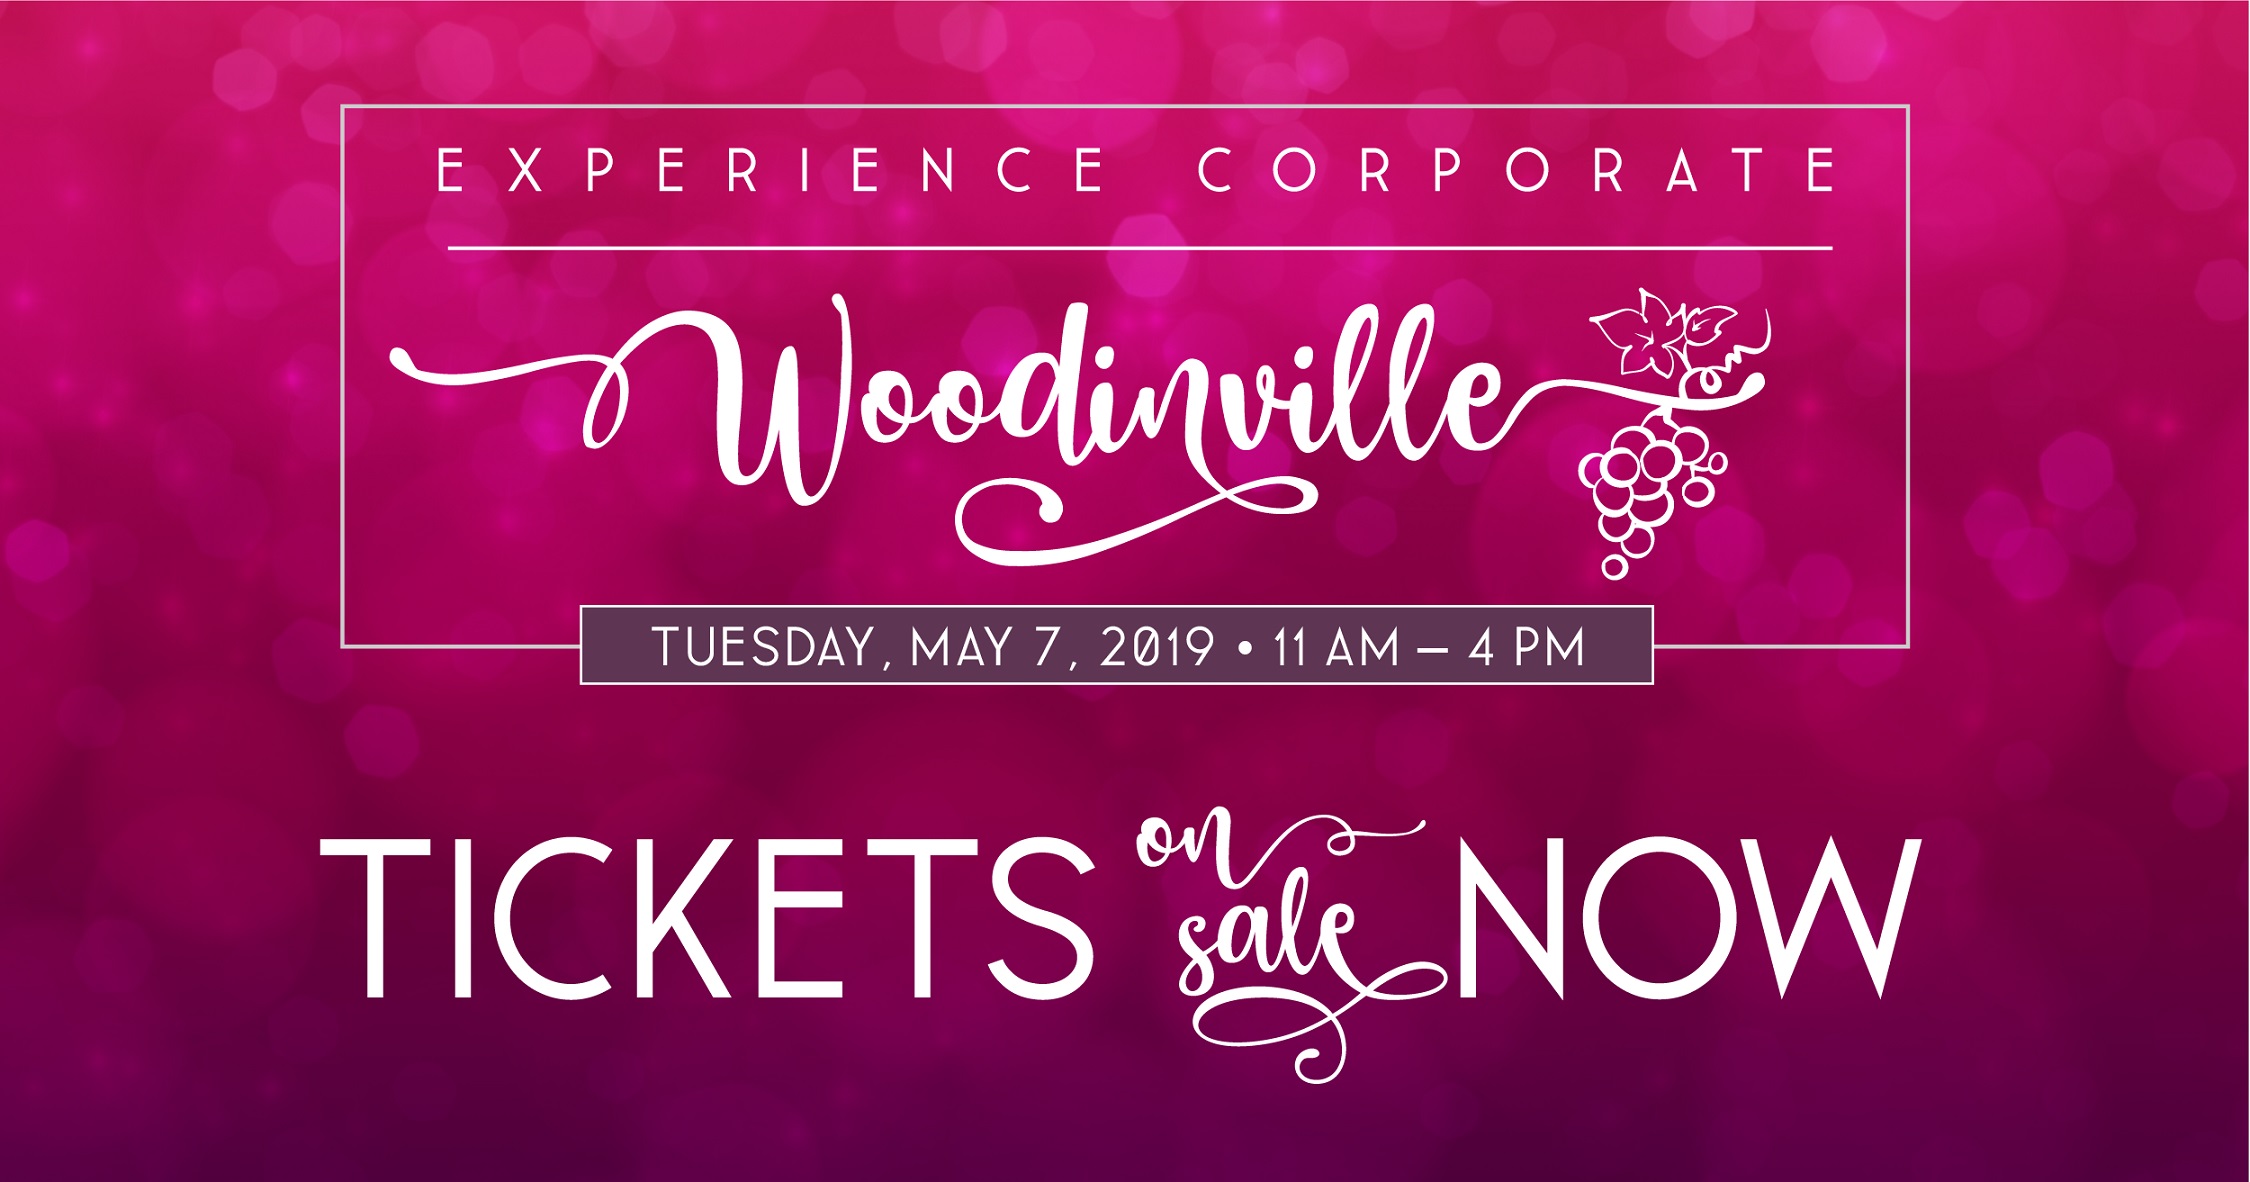 Experience Corporate Woodinville 2019